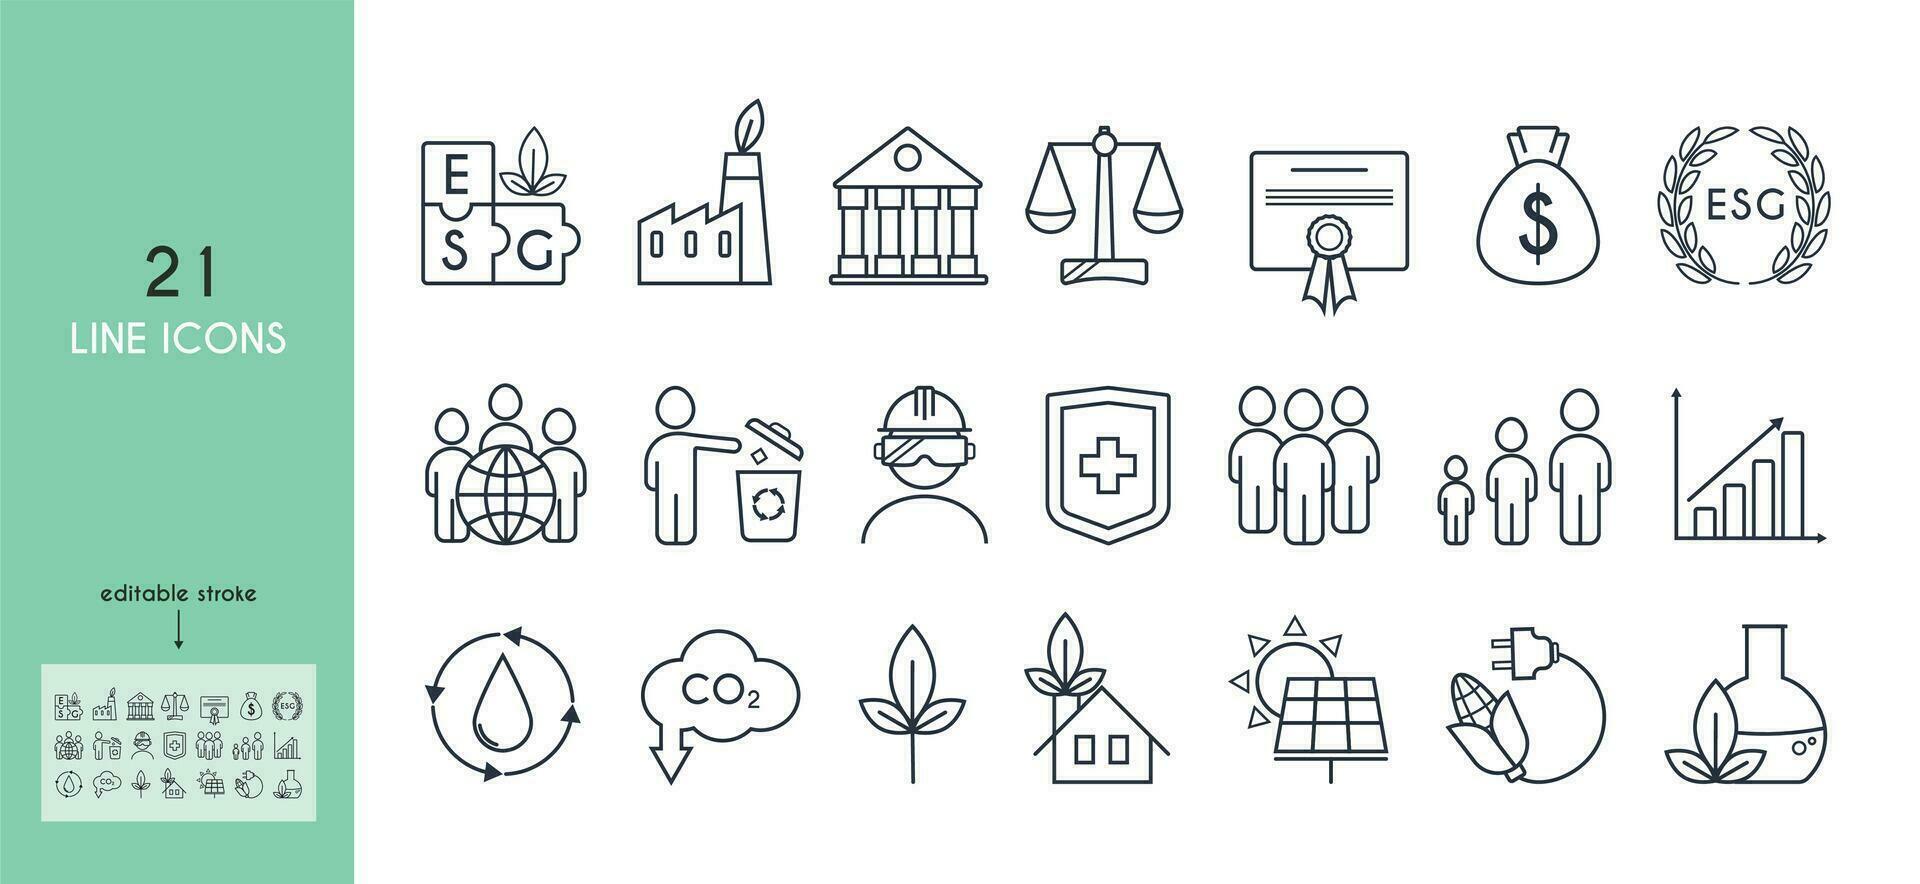 Set of icons on the environmental, social and governance aspects of sustainable and ethical business. ESG concept. Corporate vector